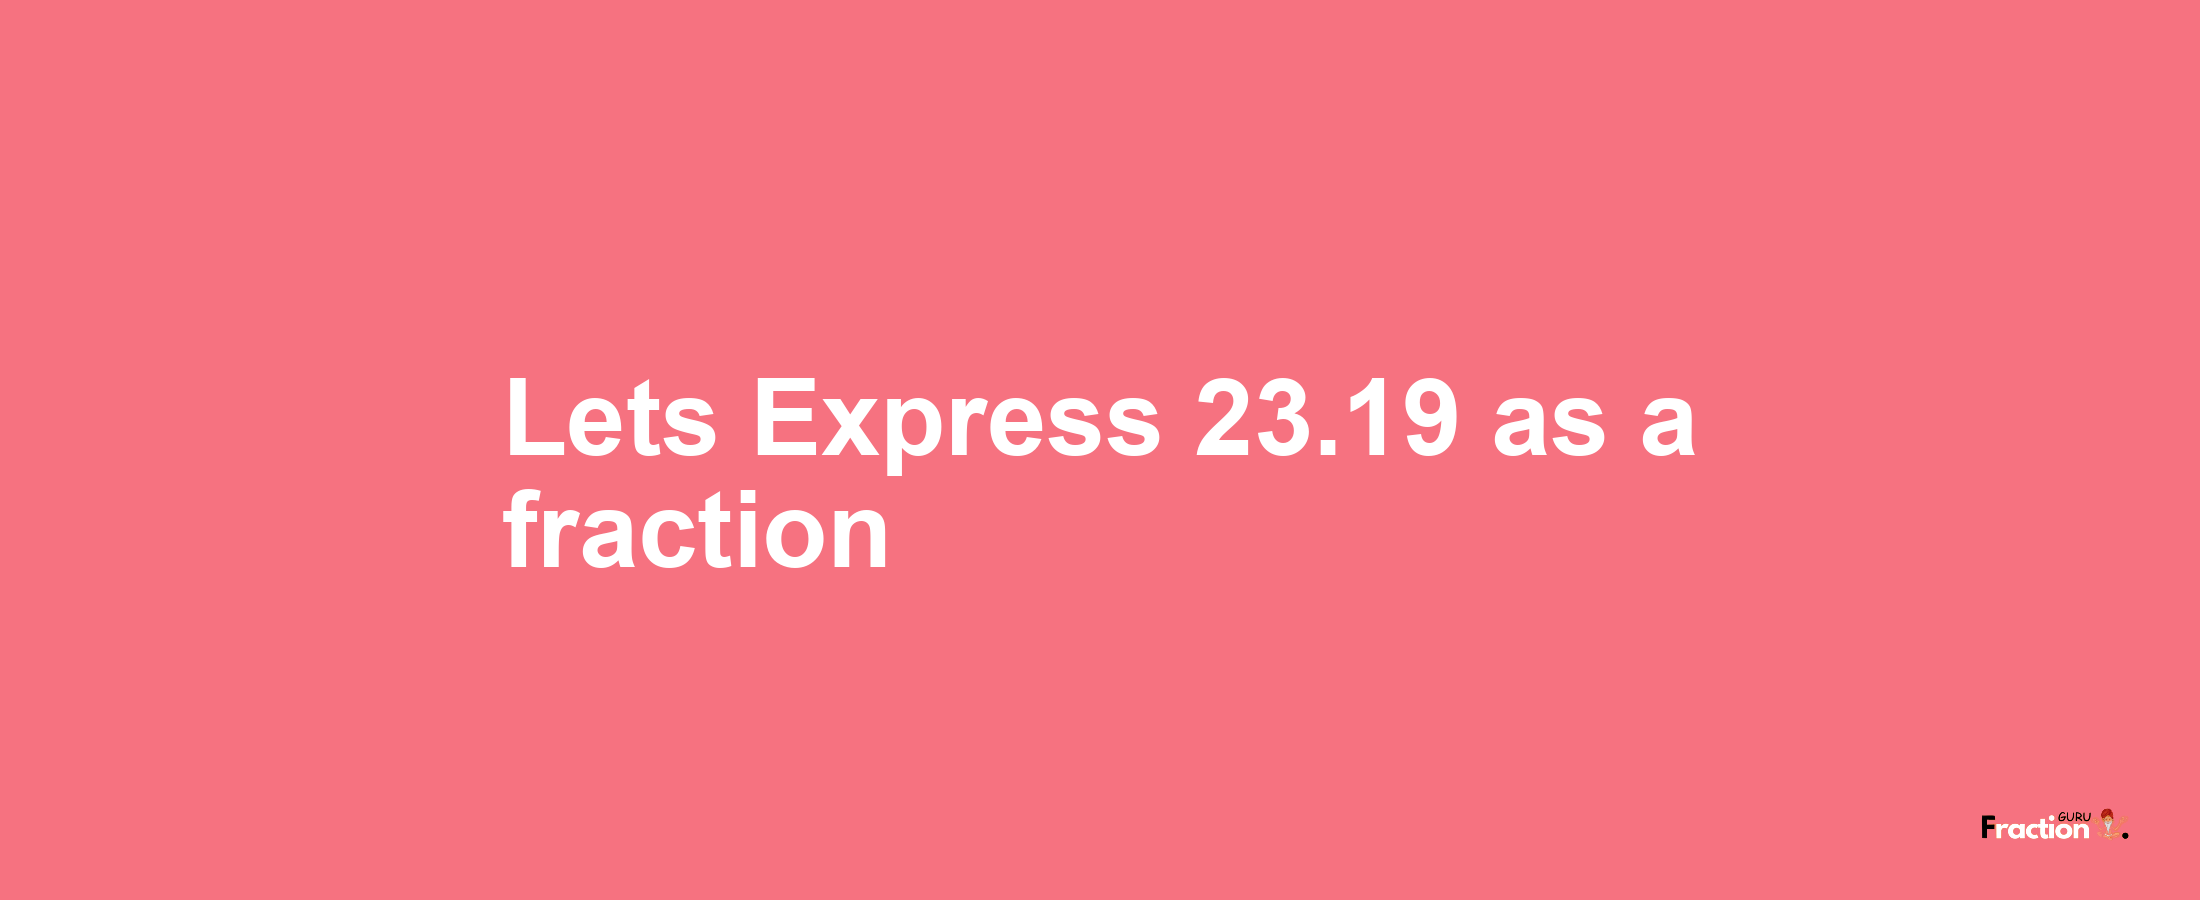 Lets Express 23.19 as afraction